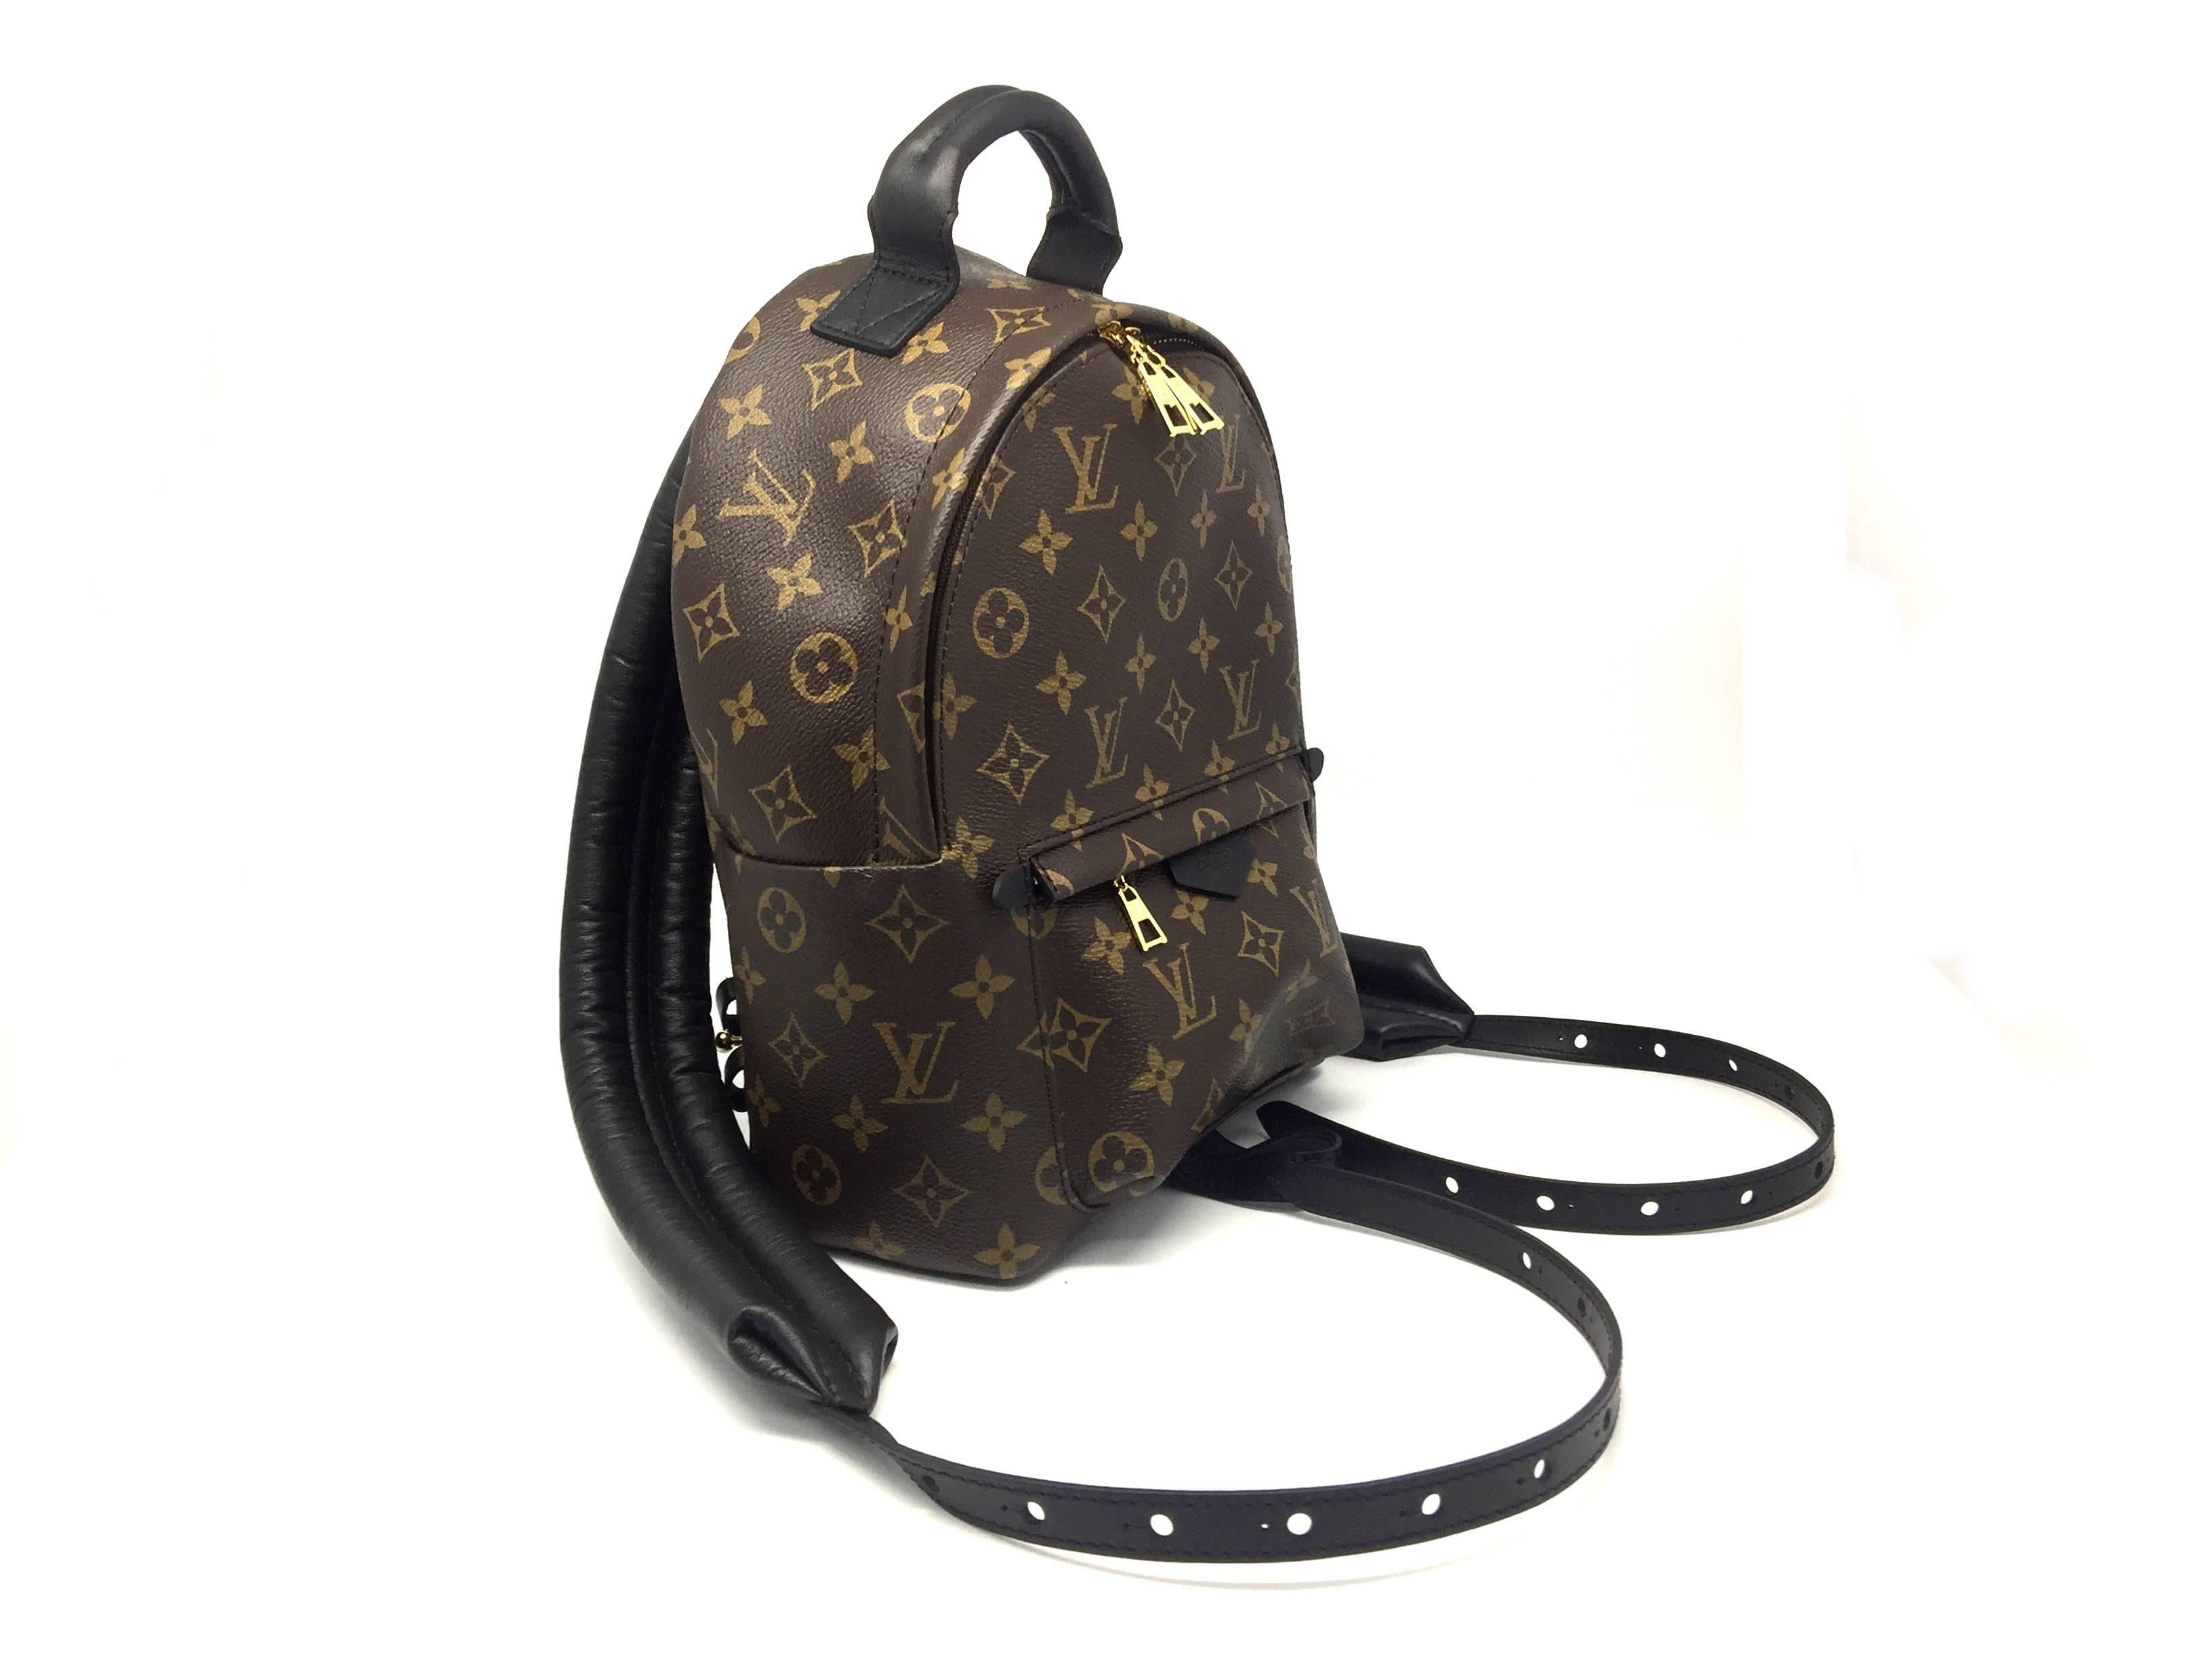 Color: Brown
Material: Monogram Canvas

Condition:
Rank N
Overall: Brand New, Not Used
Surface:Good
Corners:Good
Edges:Good
Handles/Straps:Good
Hardware:Good

Dimensions:
W21 × H27 × D10cm（W8.2" × H10.6" × D3.9"）
Handle: